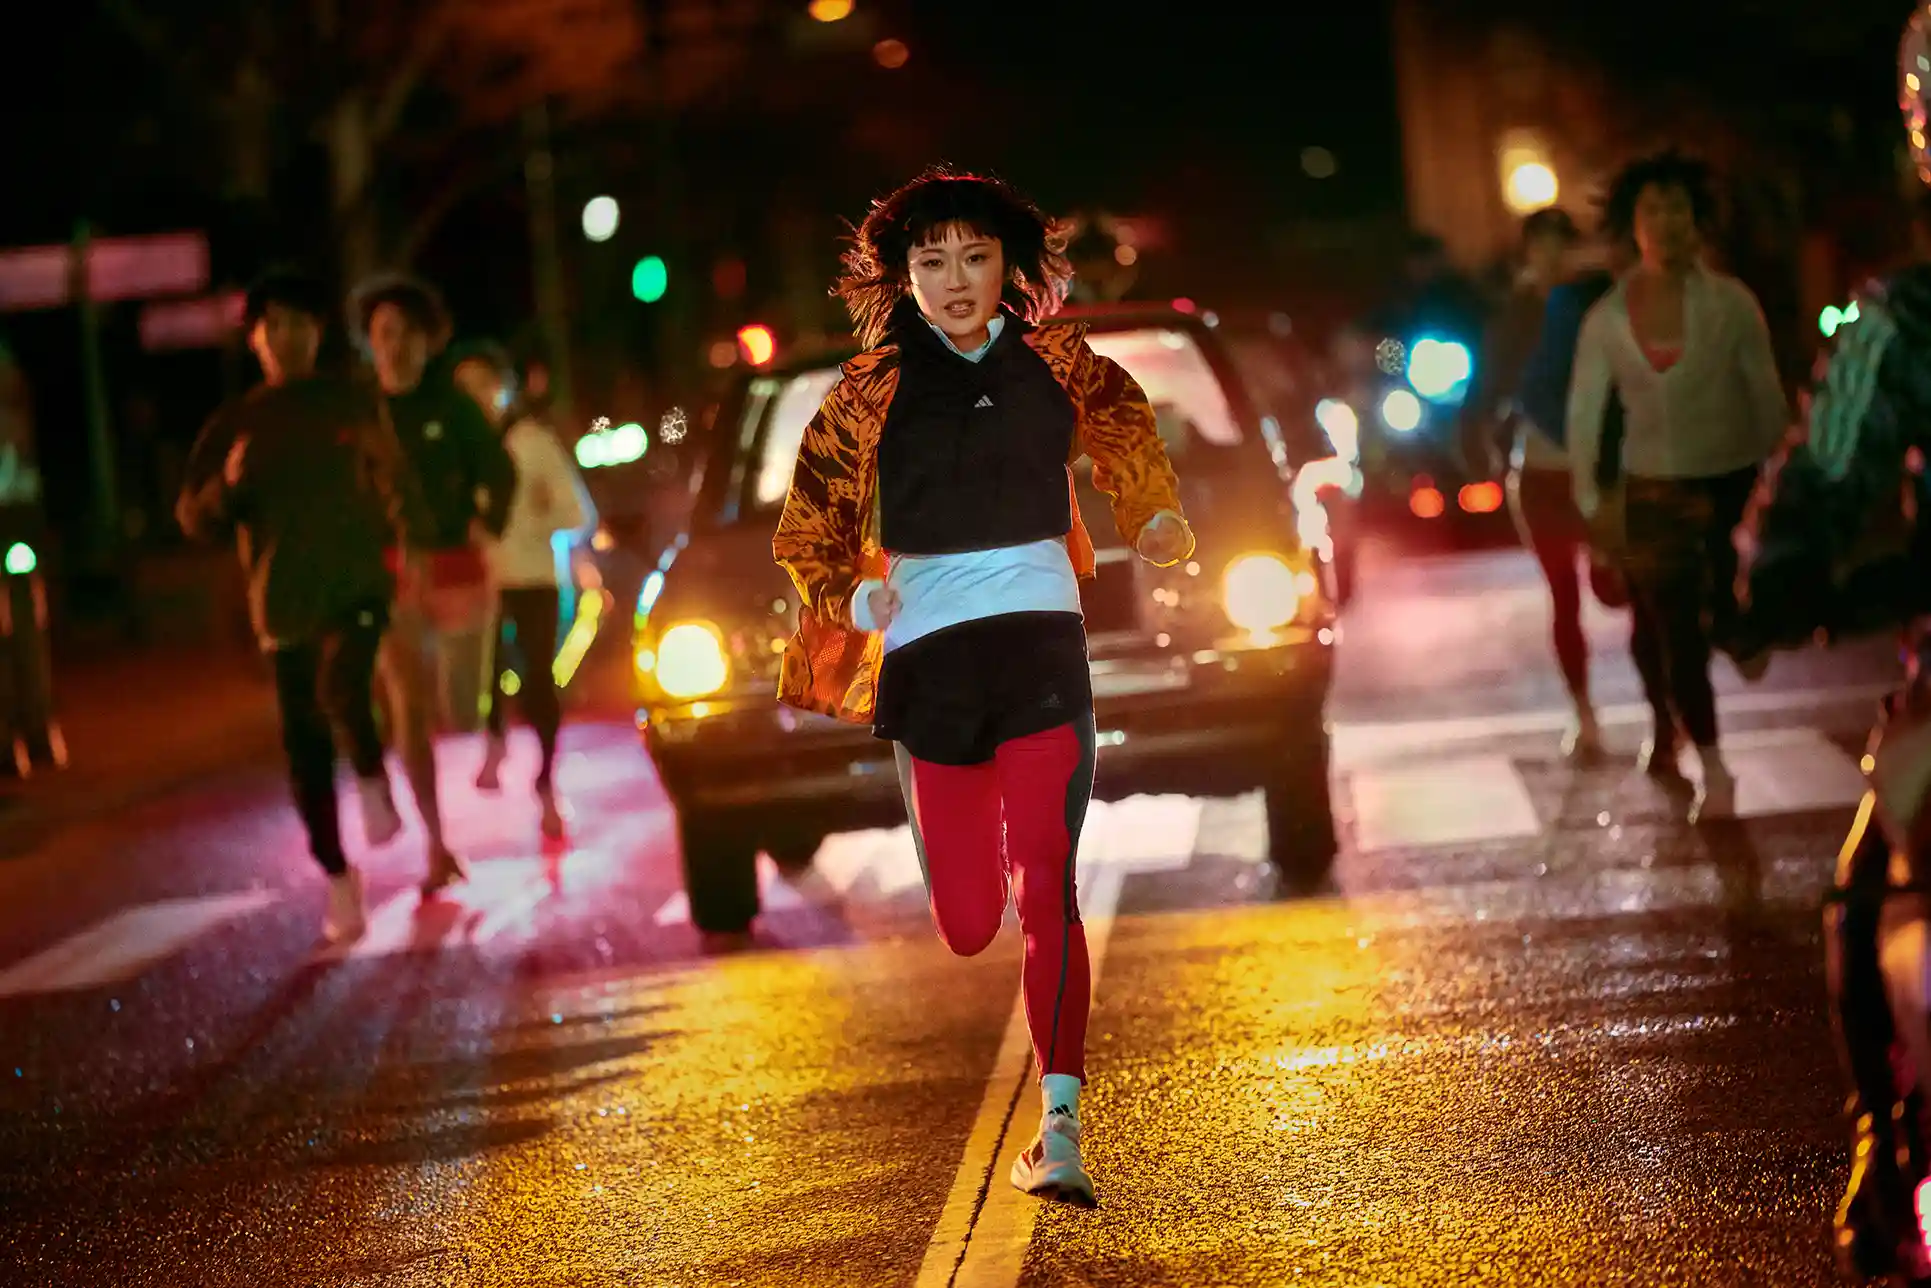 NEW ADIDAS STUDY FINDS 92% OF WOMEN ARE CONCERNED FOR THEIR SAFETY WHEN THEY GO FOR A RUN  © Copyright PLPG GLOBAL MEDIA 2023